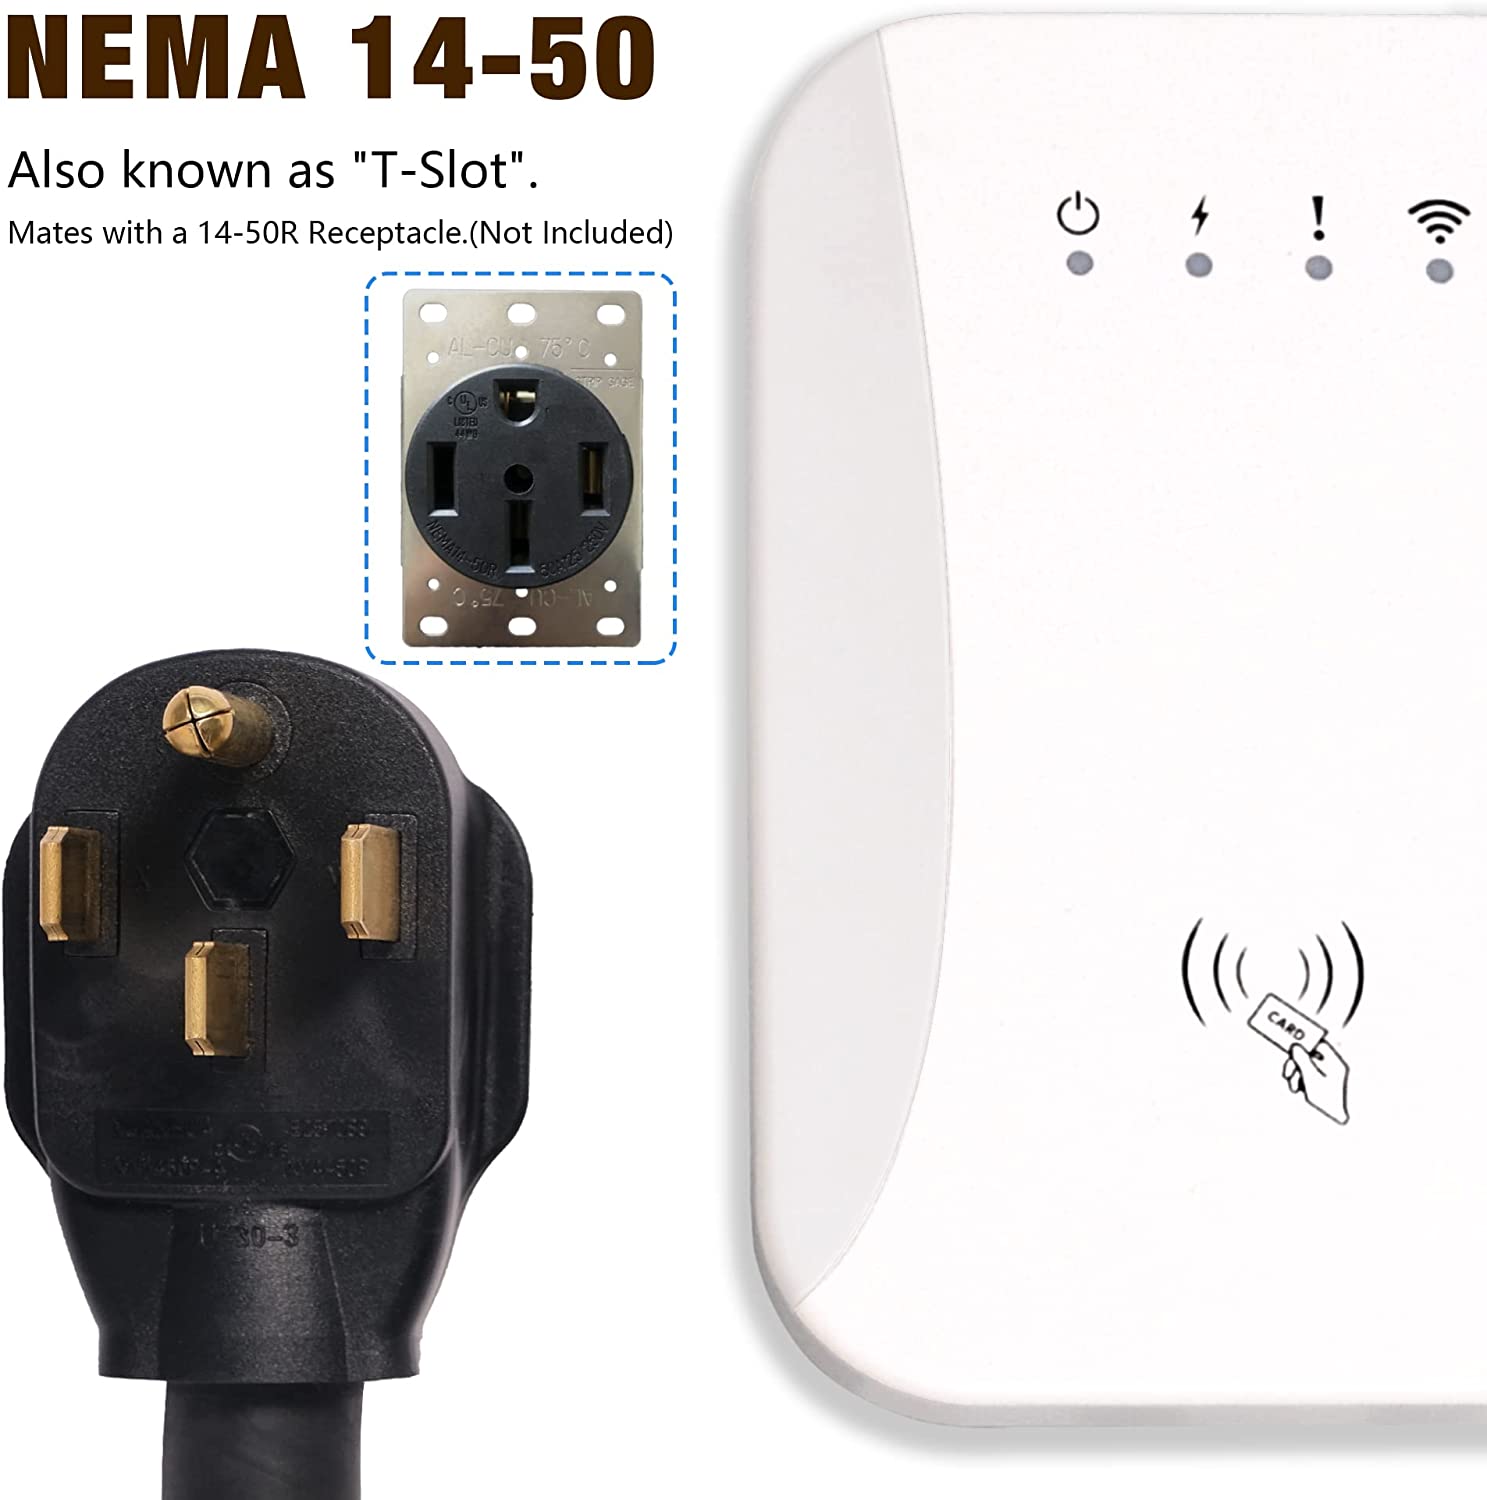 (Out of Stock) 40 Amp 240V Level 2 EV Charger with 25 ft. J1772 Cable, NEMA 14-50 Plug